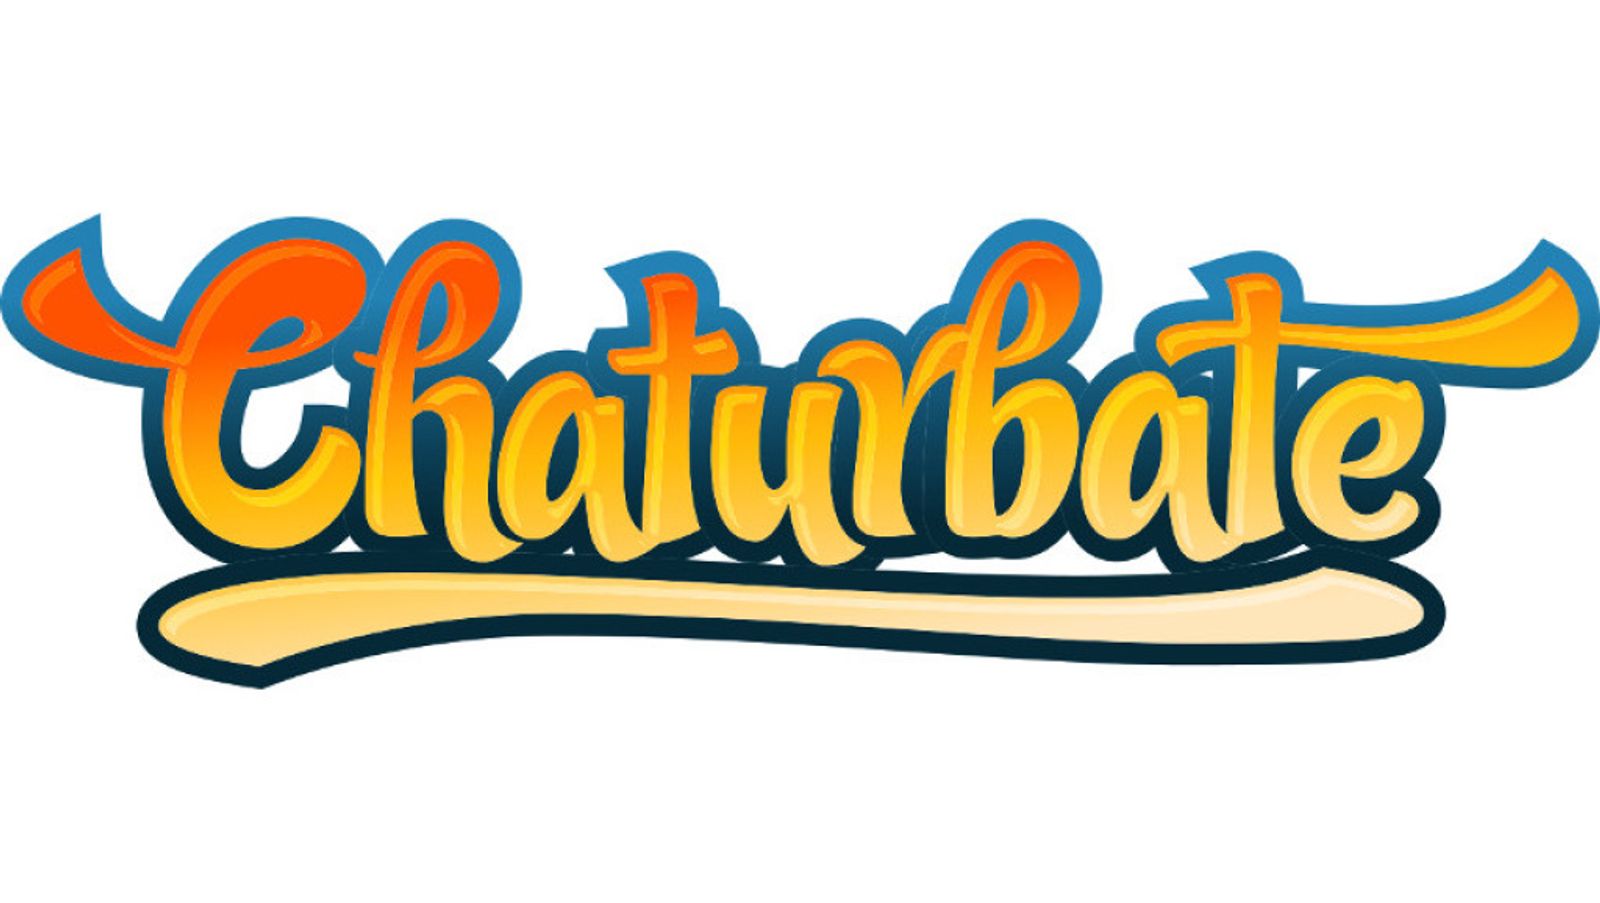 'Share Why You Love Chaturbate' Contest Winners Announced